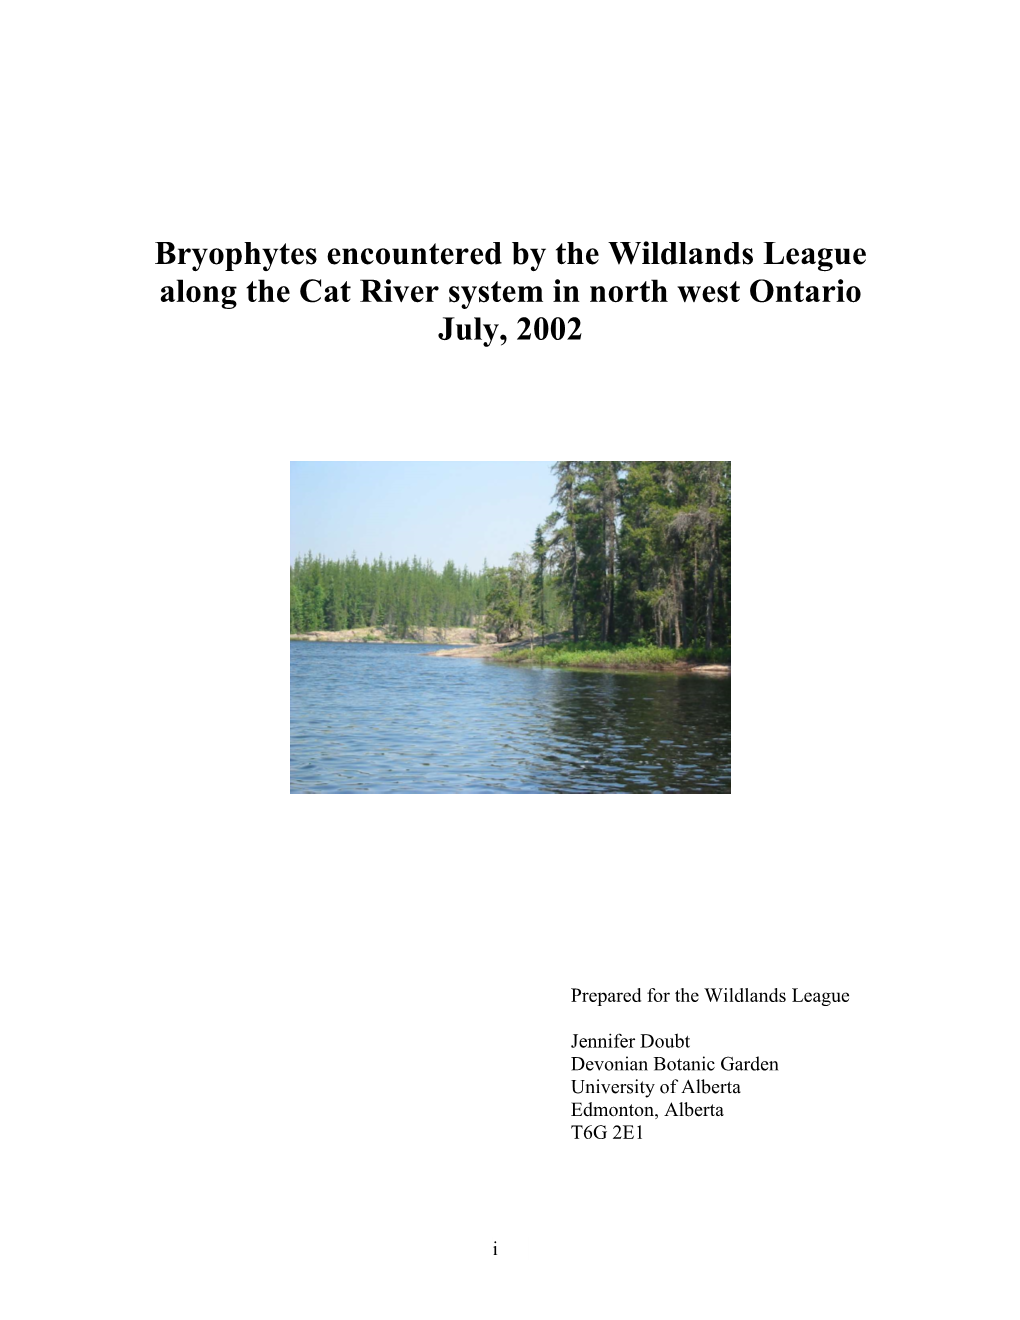 Bryophytes Encountered by the Wildlands League Along the Cat River System in North West Ontario July, 2002